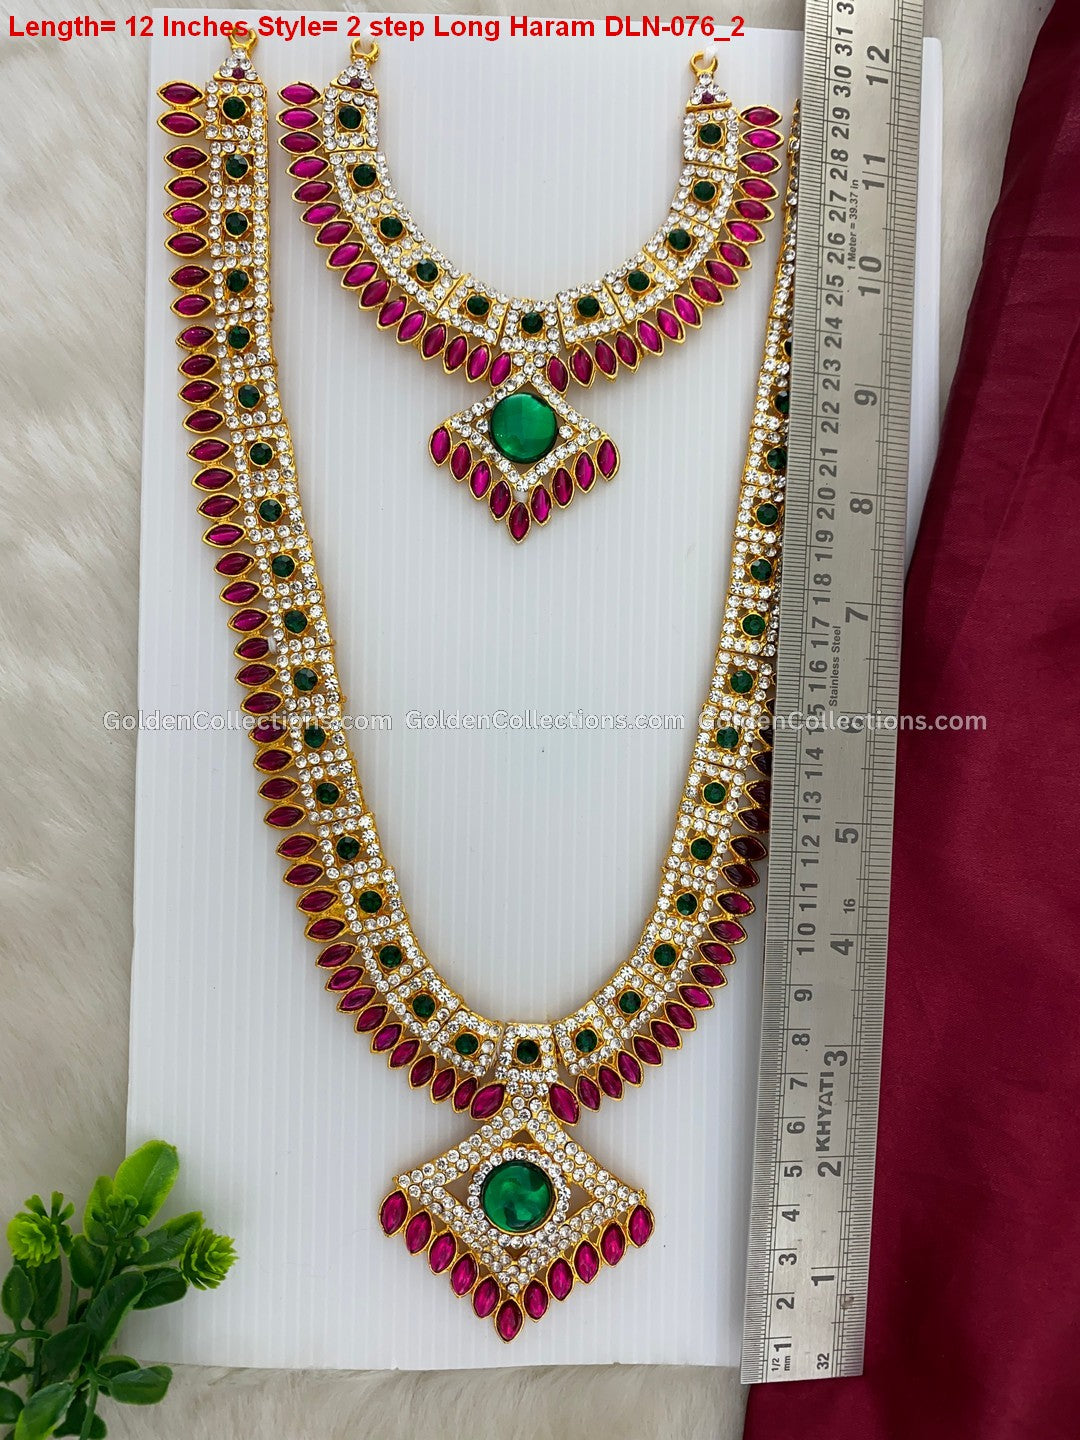 Deity Jewellery for God Statues - Limited Stock! DLN-076 2